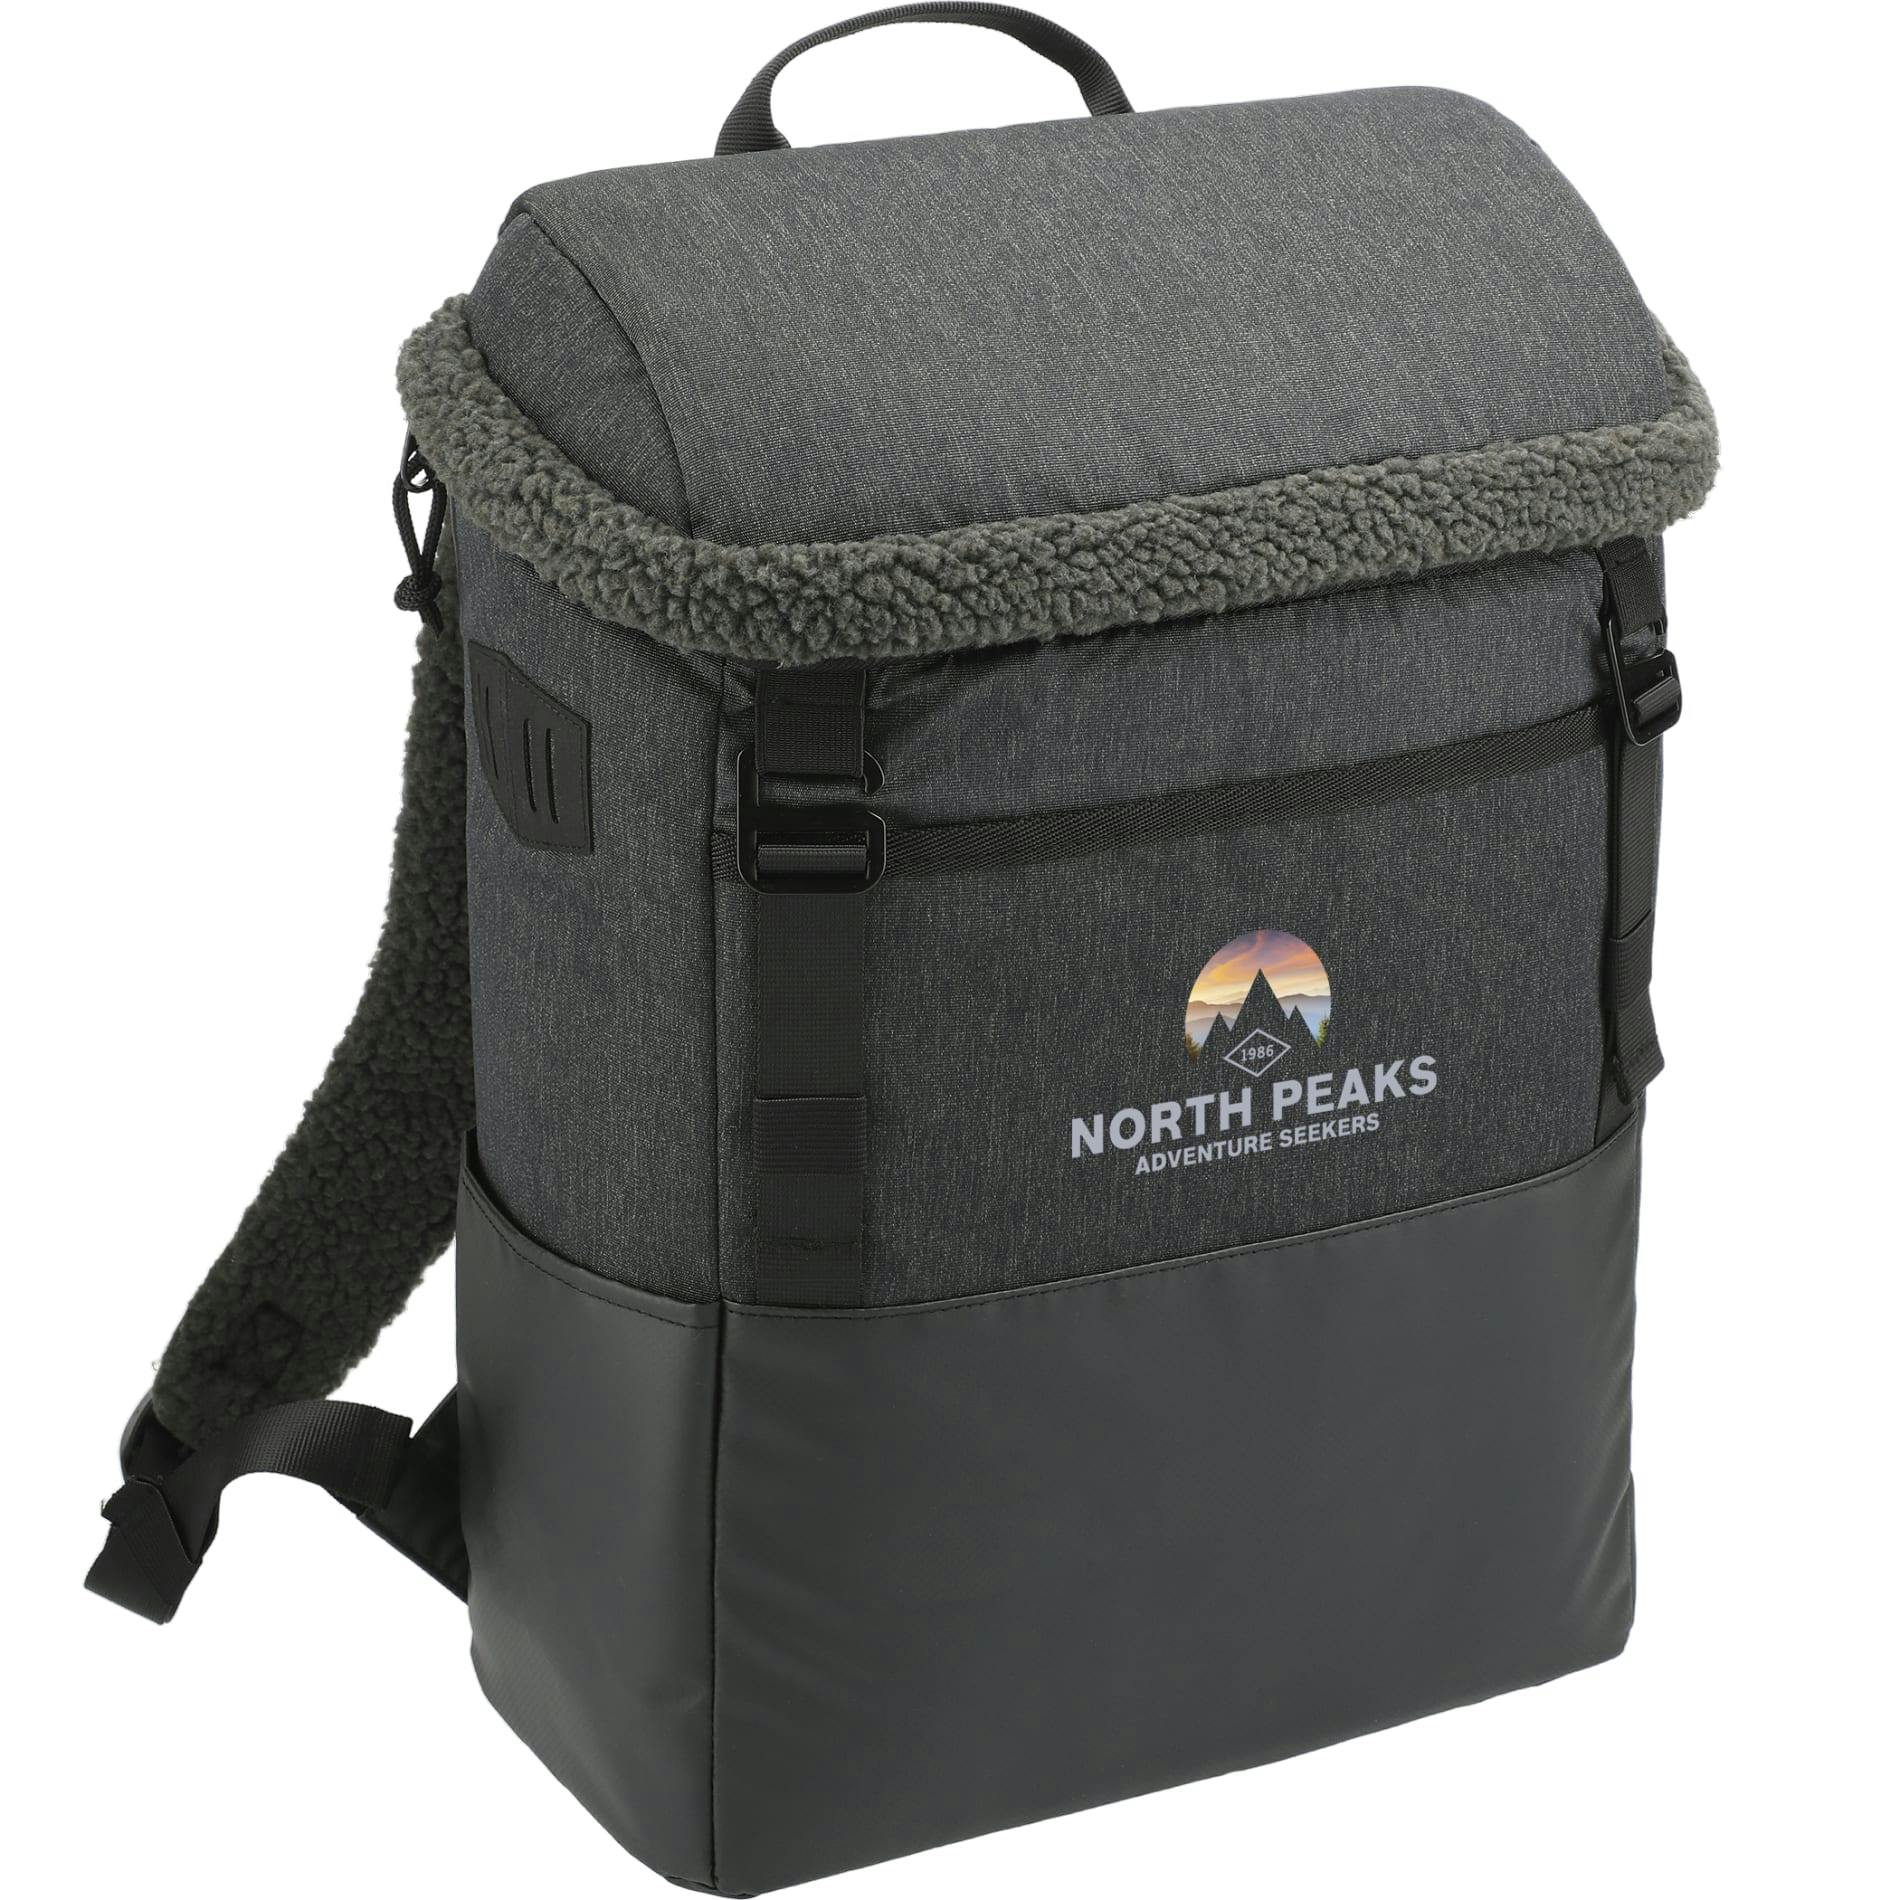 Field & Co. Fireside Eco 12 Can Backpack Cooler - additional Image 2